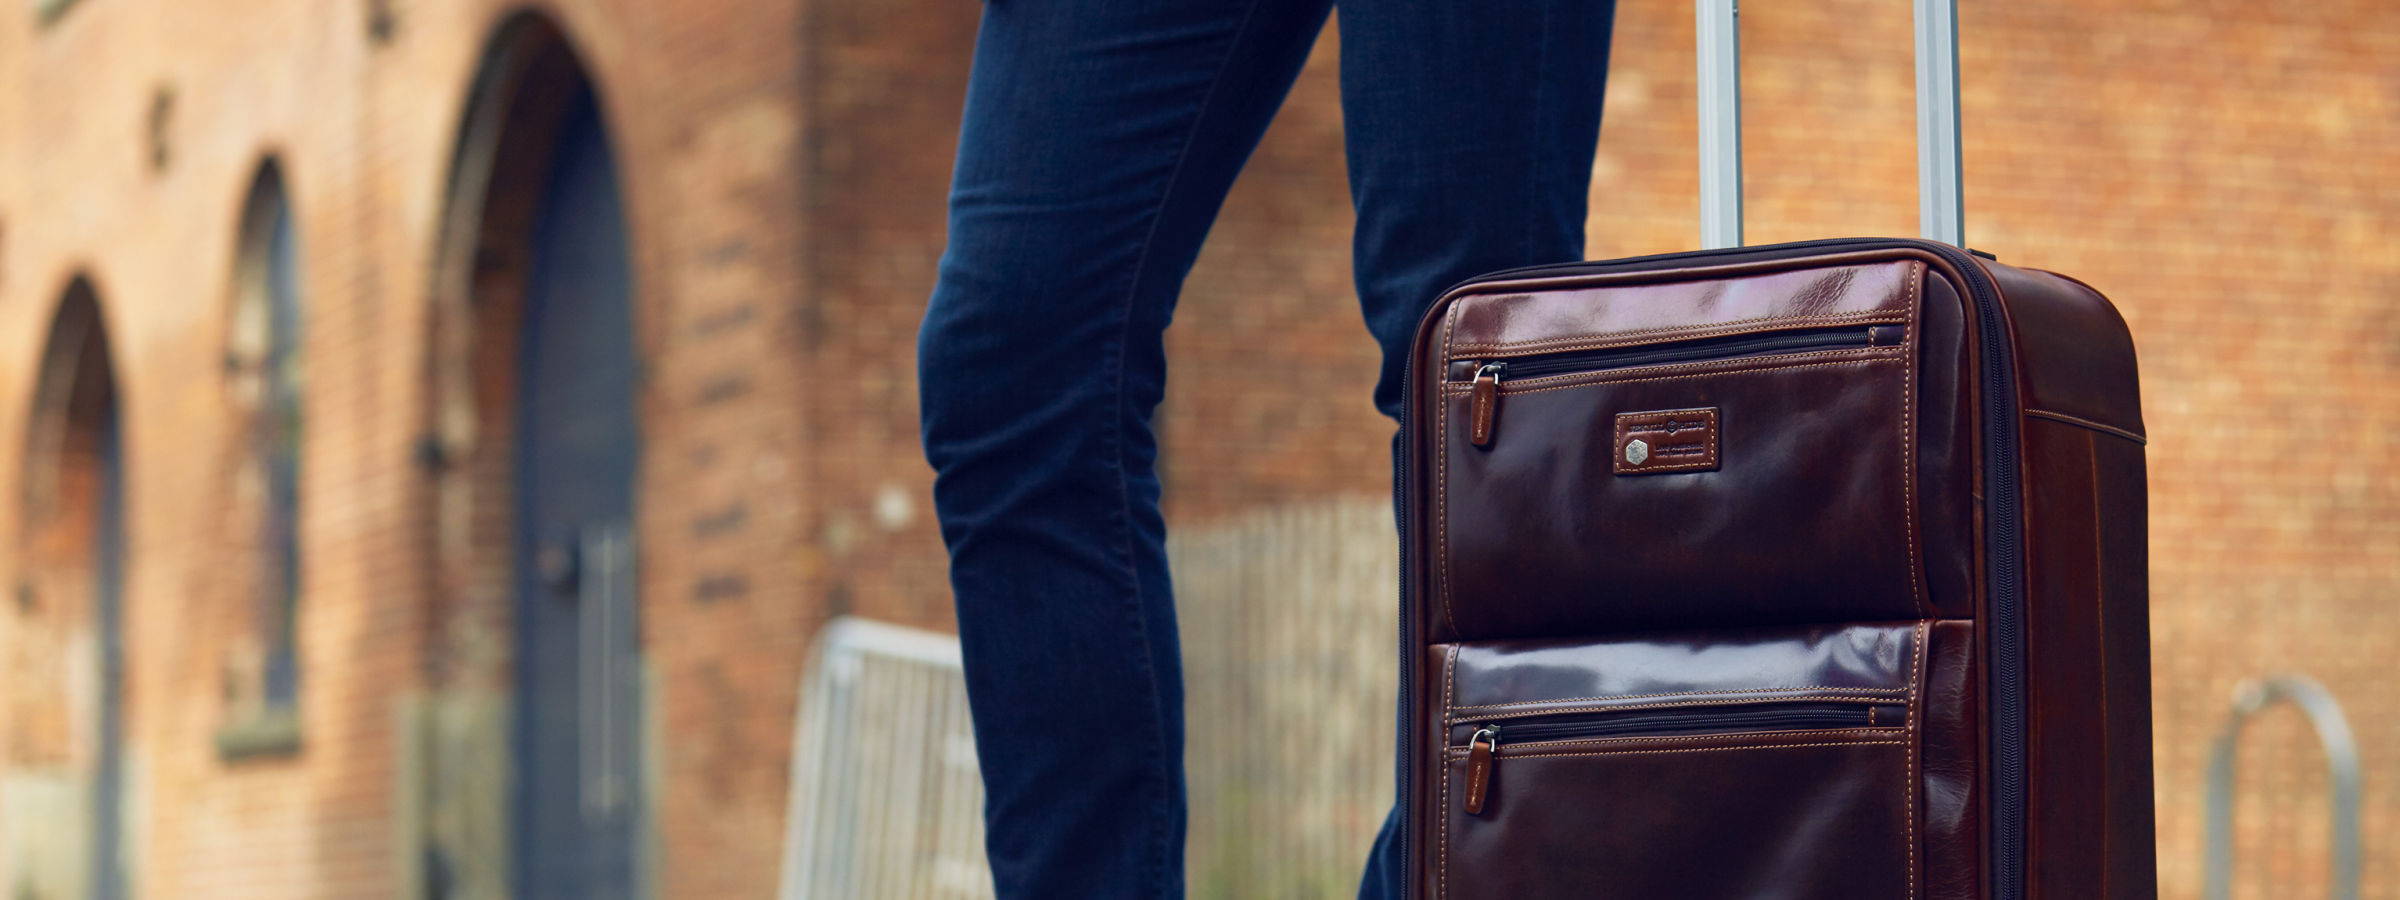 Men's Travel Bags | Jekyll  Hide Leather UK | Shop Leather Online | Global  Shippinh